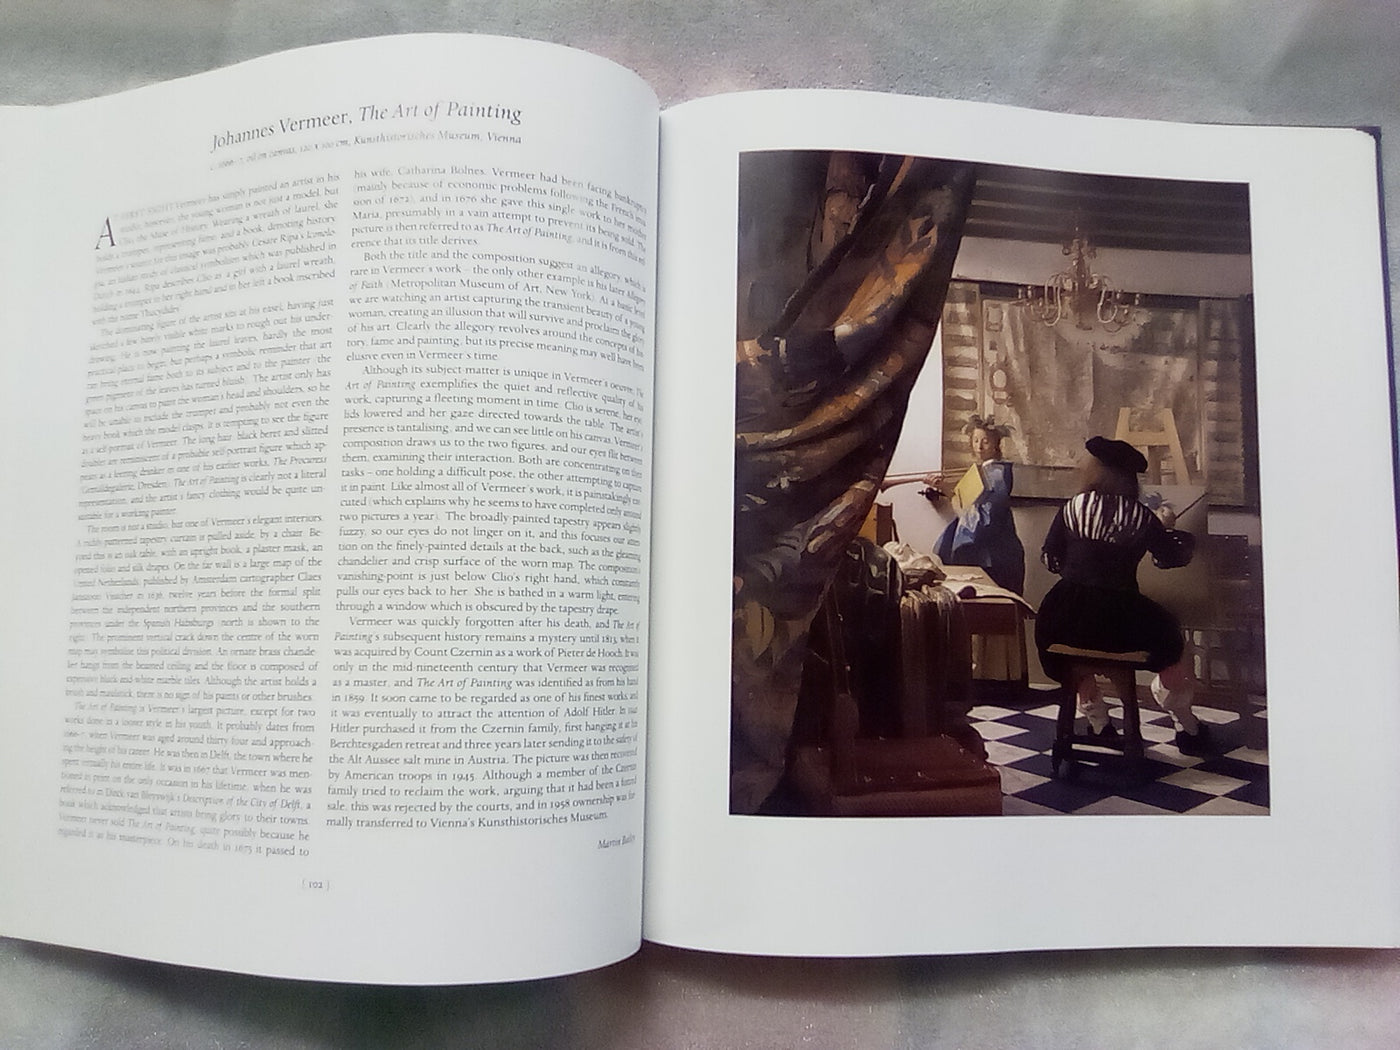 The Folio Society Book of the 100 Greatest Paintings